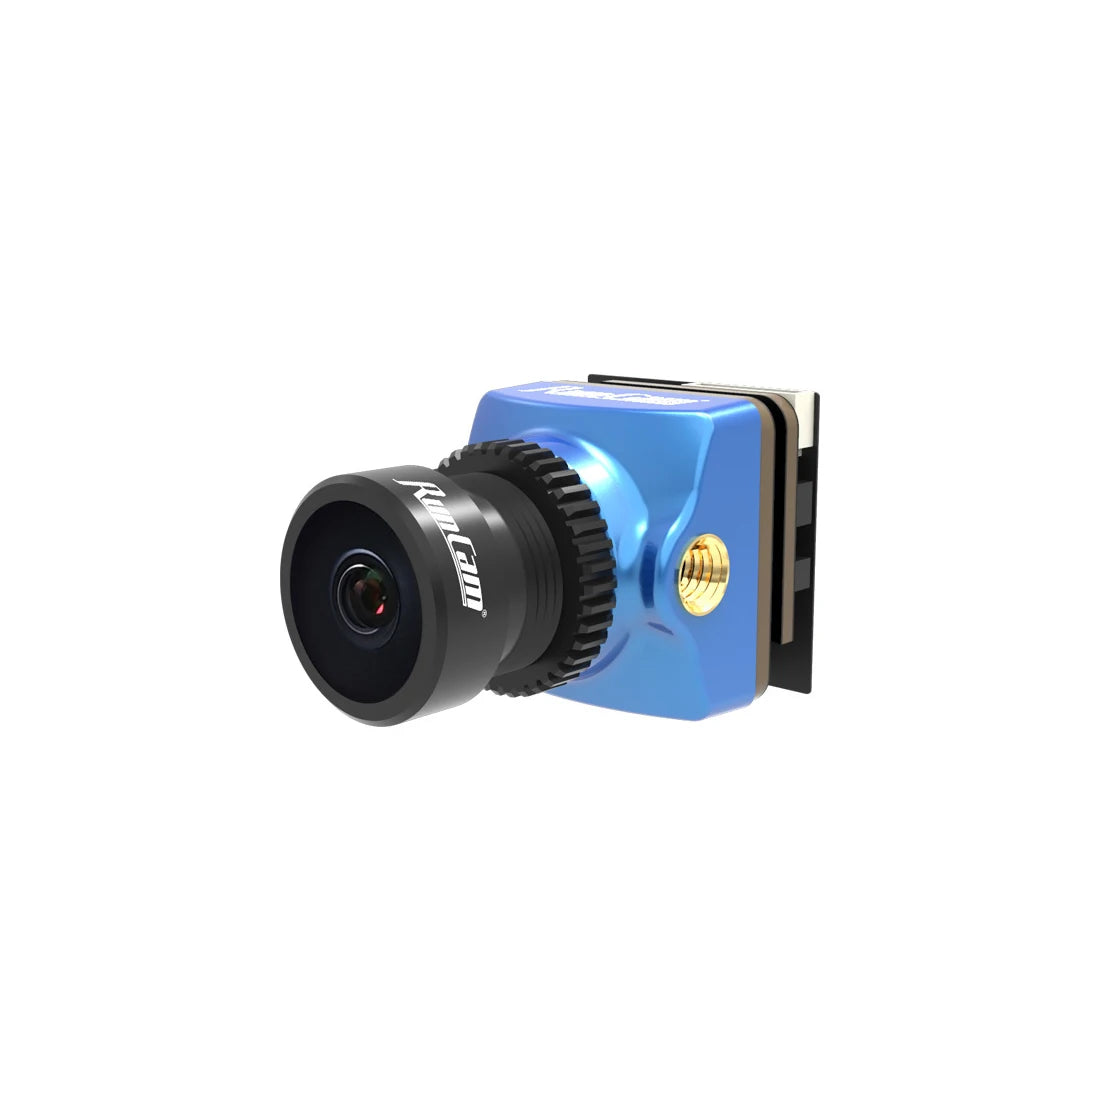 RunCam Phoenix 2 Analog FPV Camera, WDR Global WDR Day/Night Color/BW/EXT/Auto